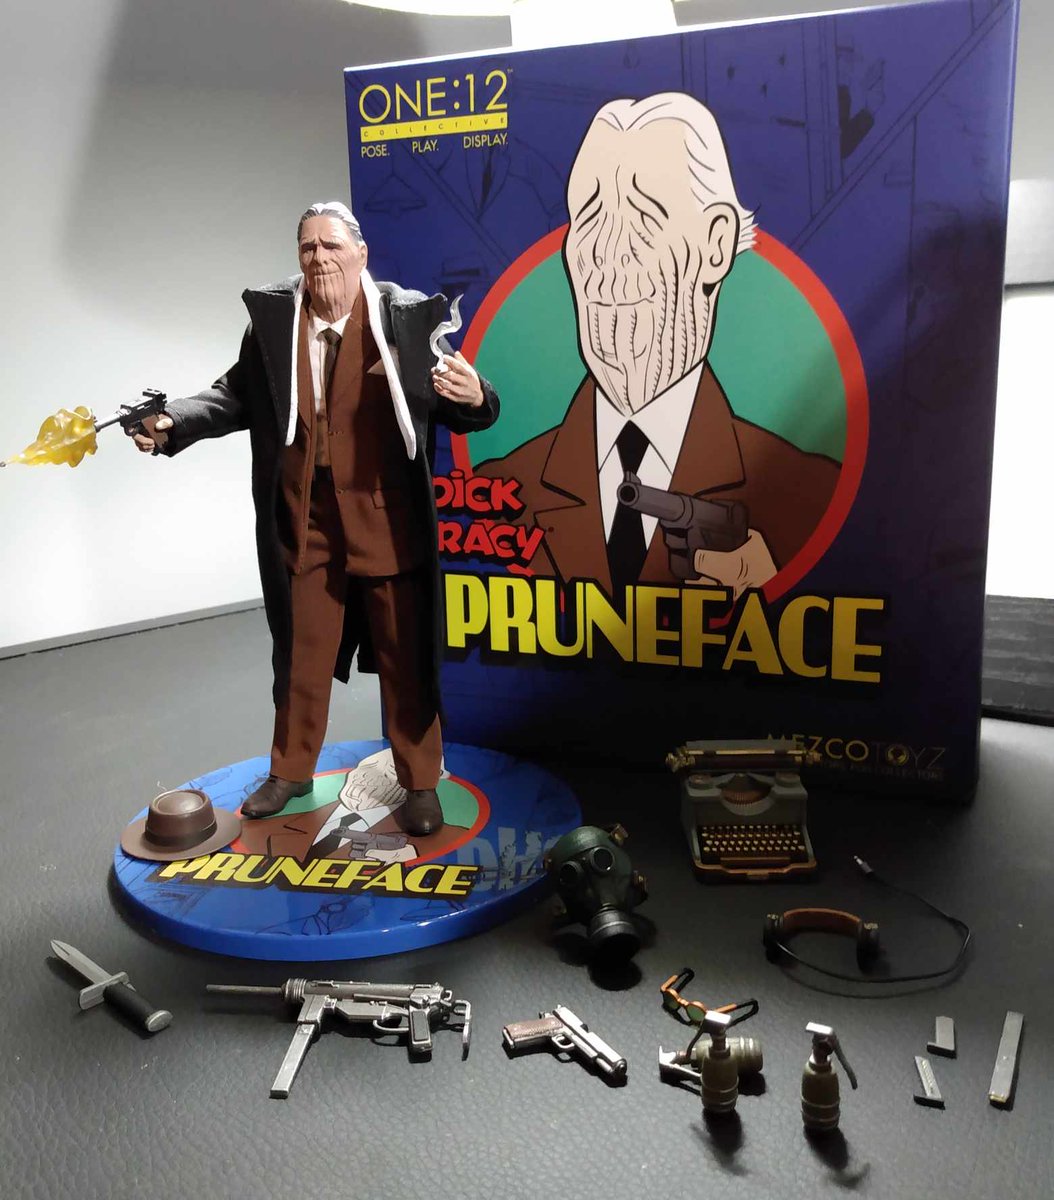 New coworker showed up today. I think we're going to have to go over the office smoking policy again... #dicktracy #pruneface #mezcotoyz